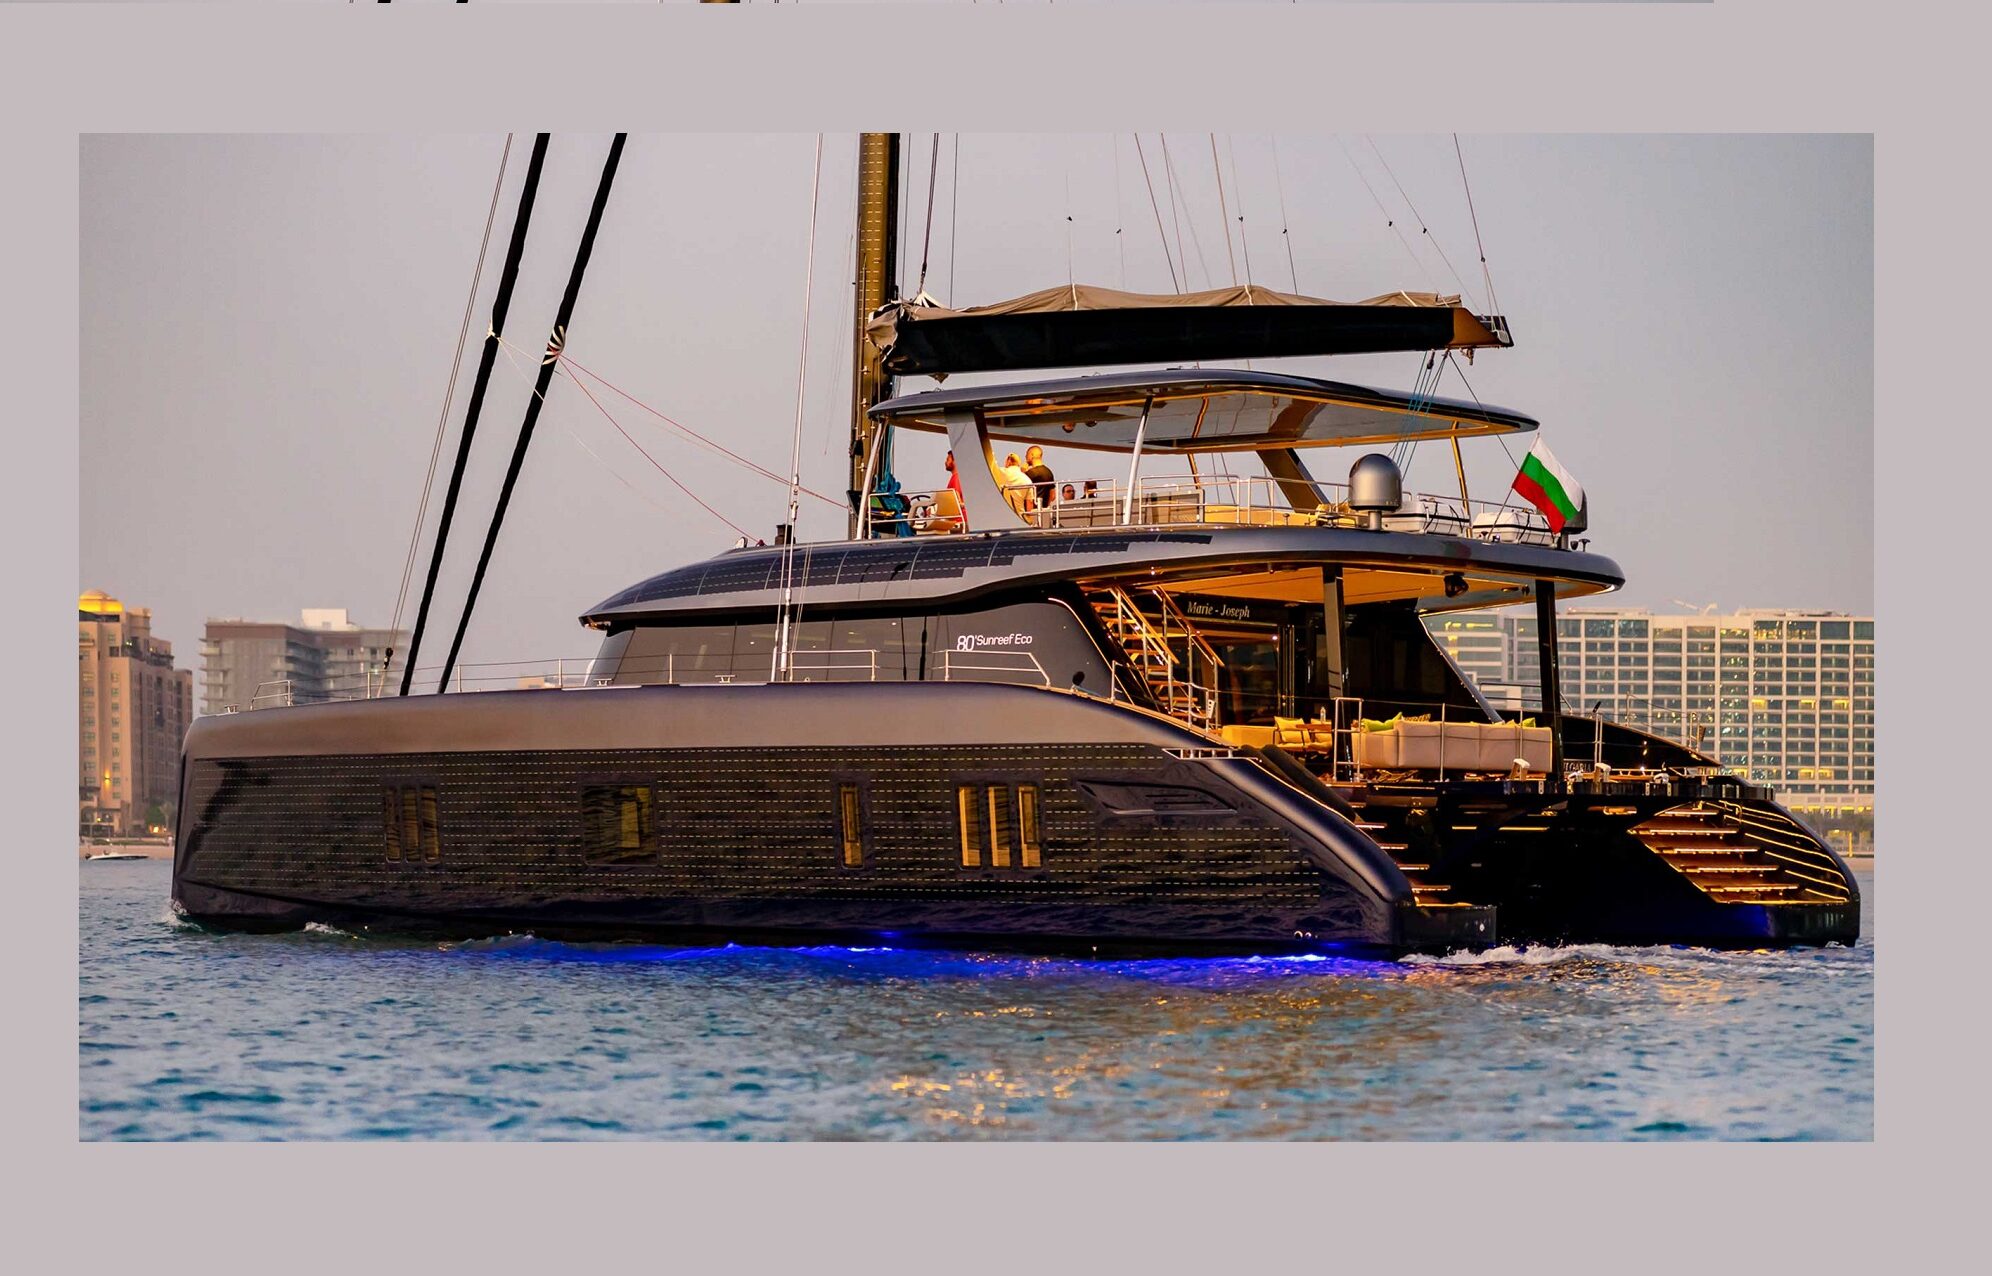 sunreef yachts middle east dmcc